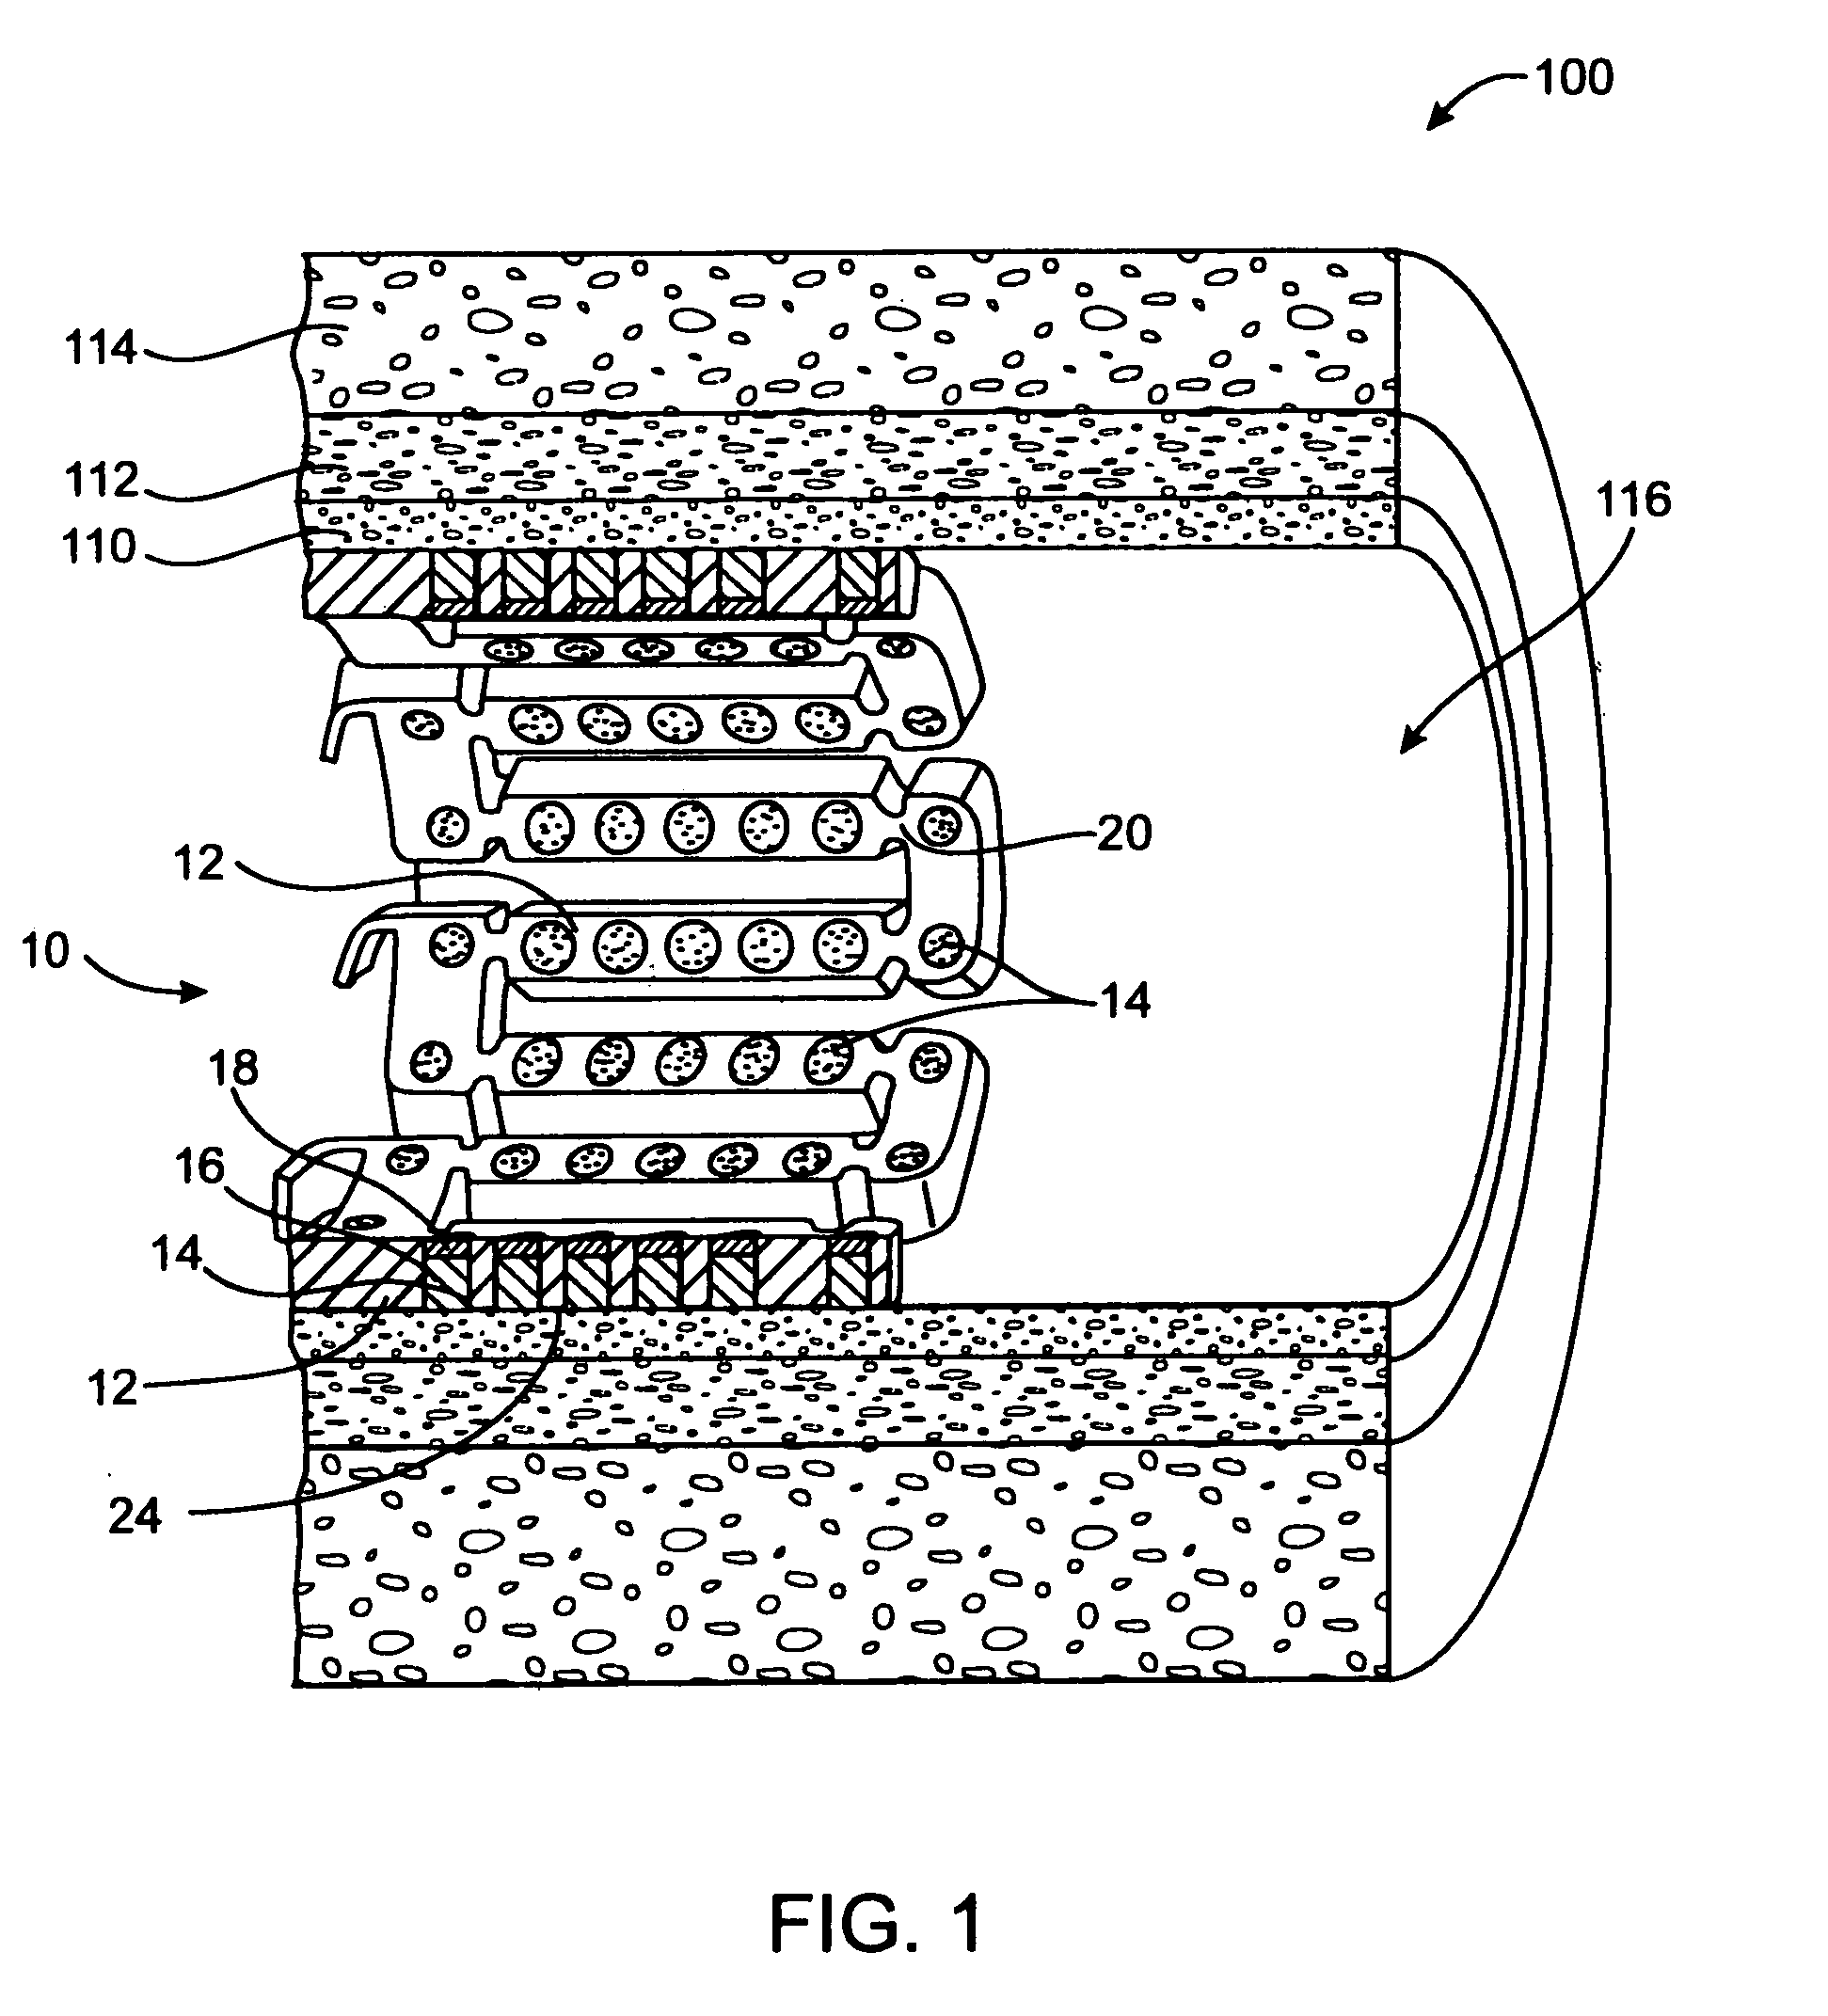 Expandable medical device and method for treating chronic total occlusions with local delivery of an angiogenic factor